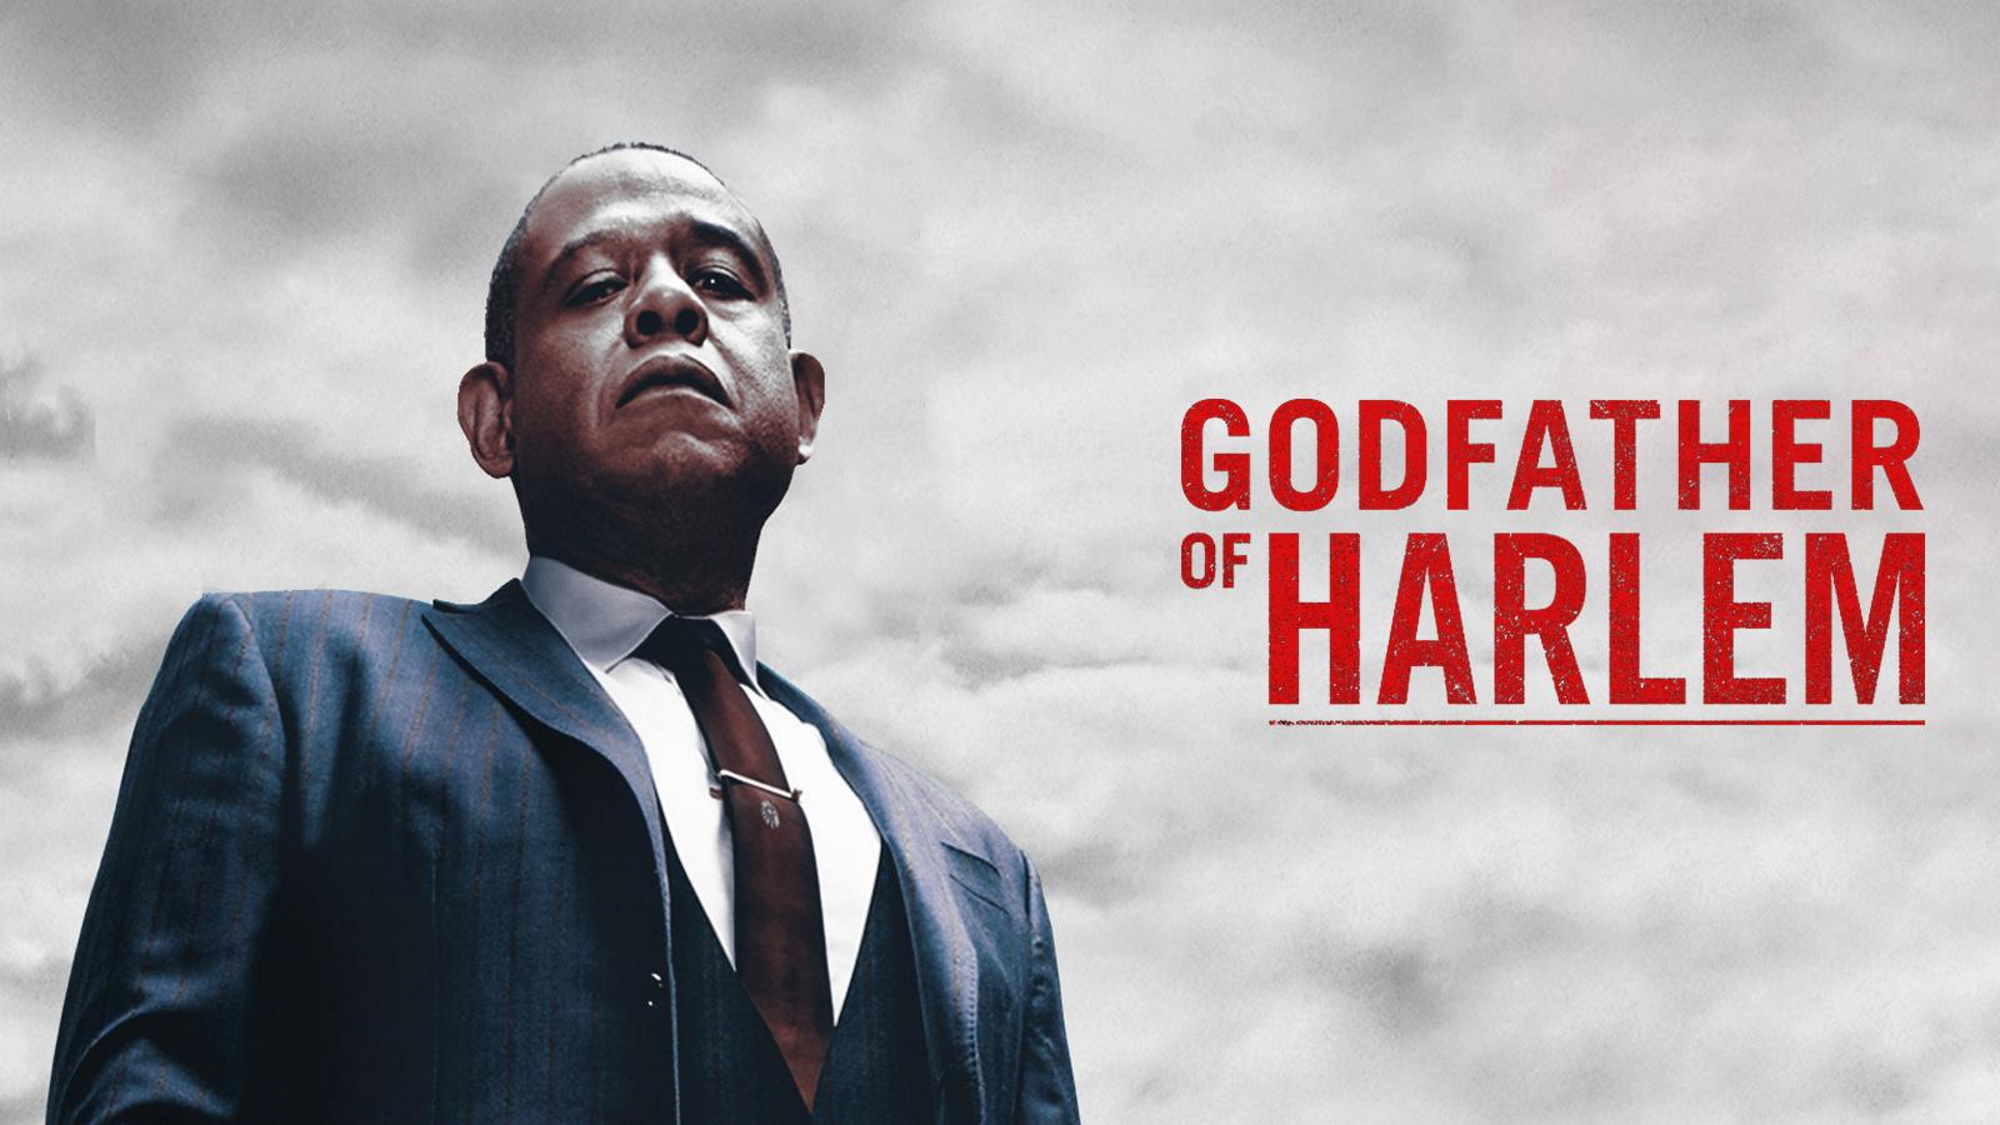 Godfather of Harlem Season 2 Watch Online for Free